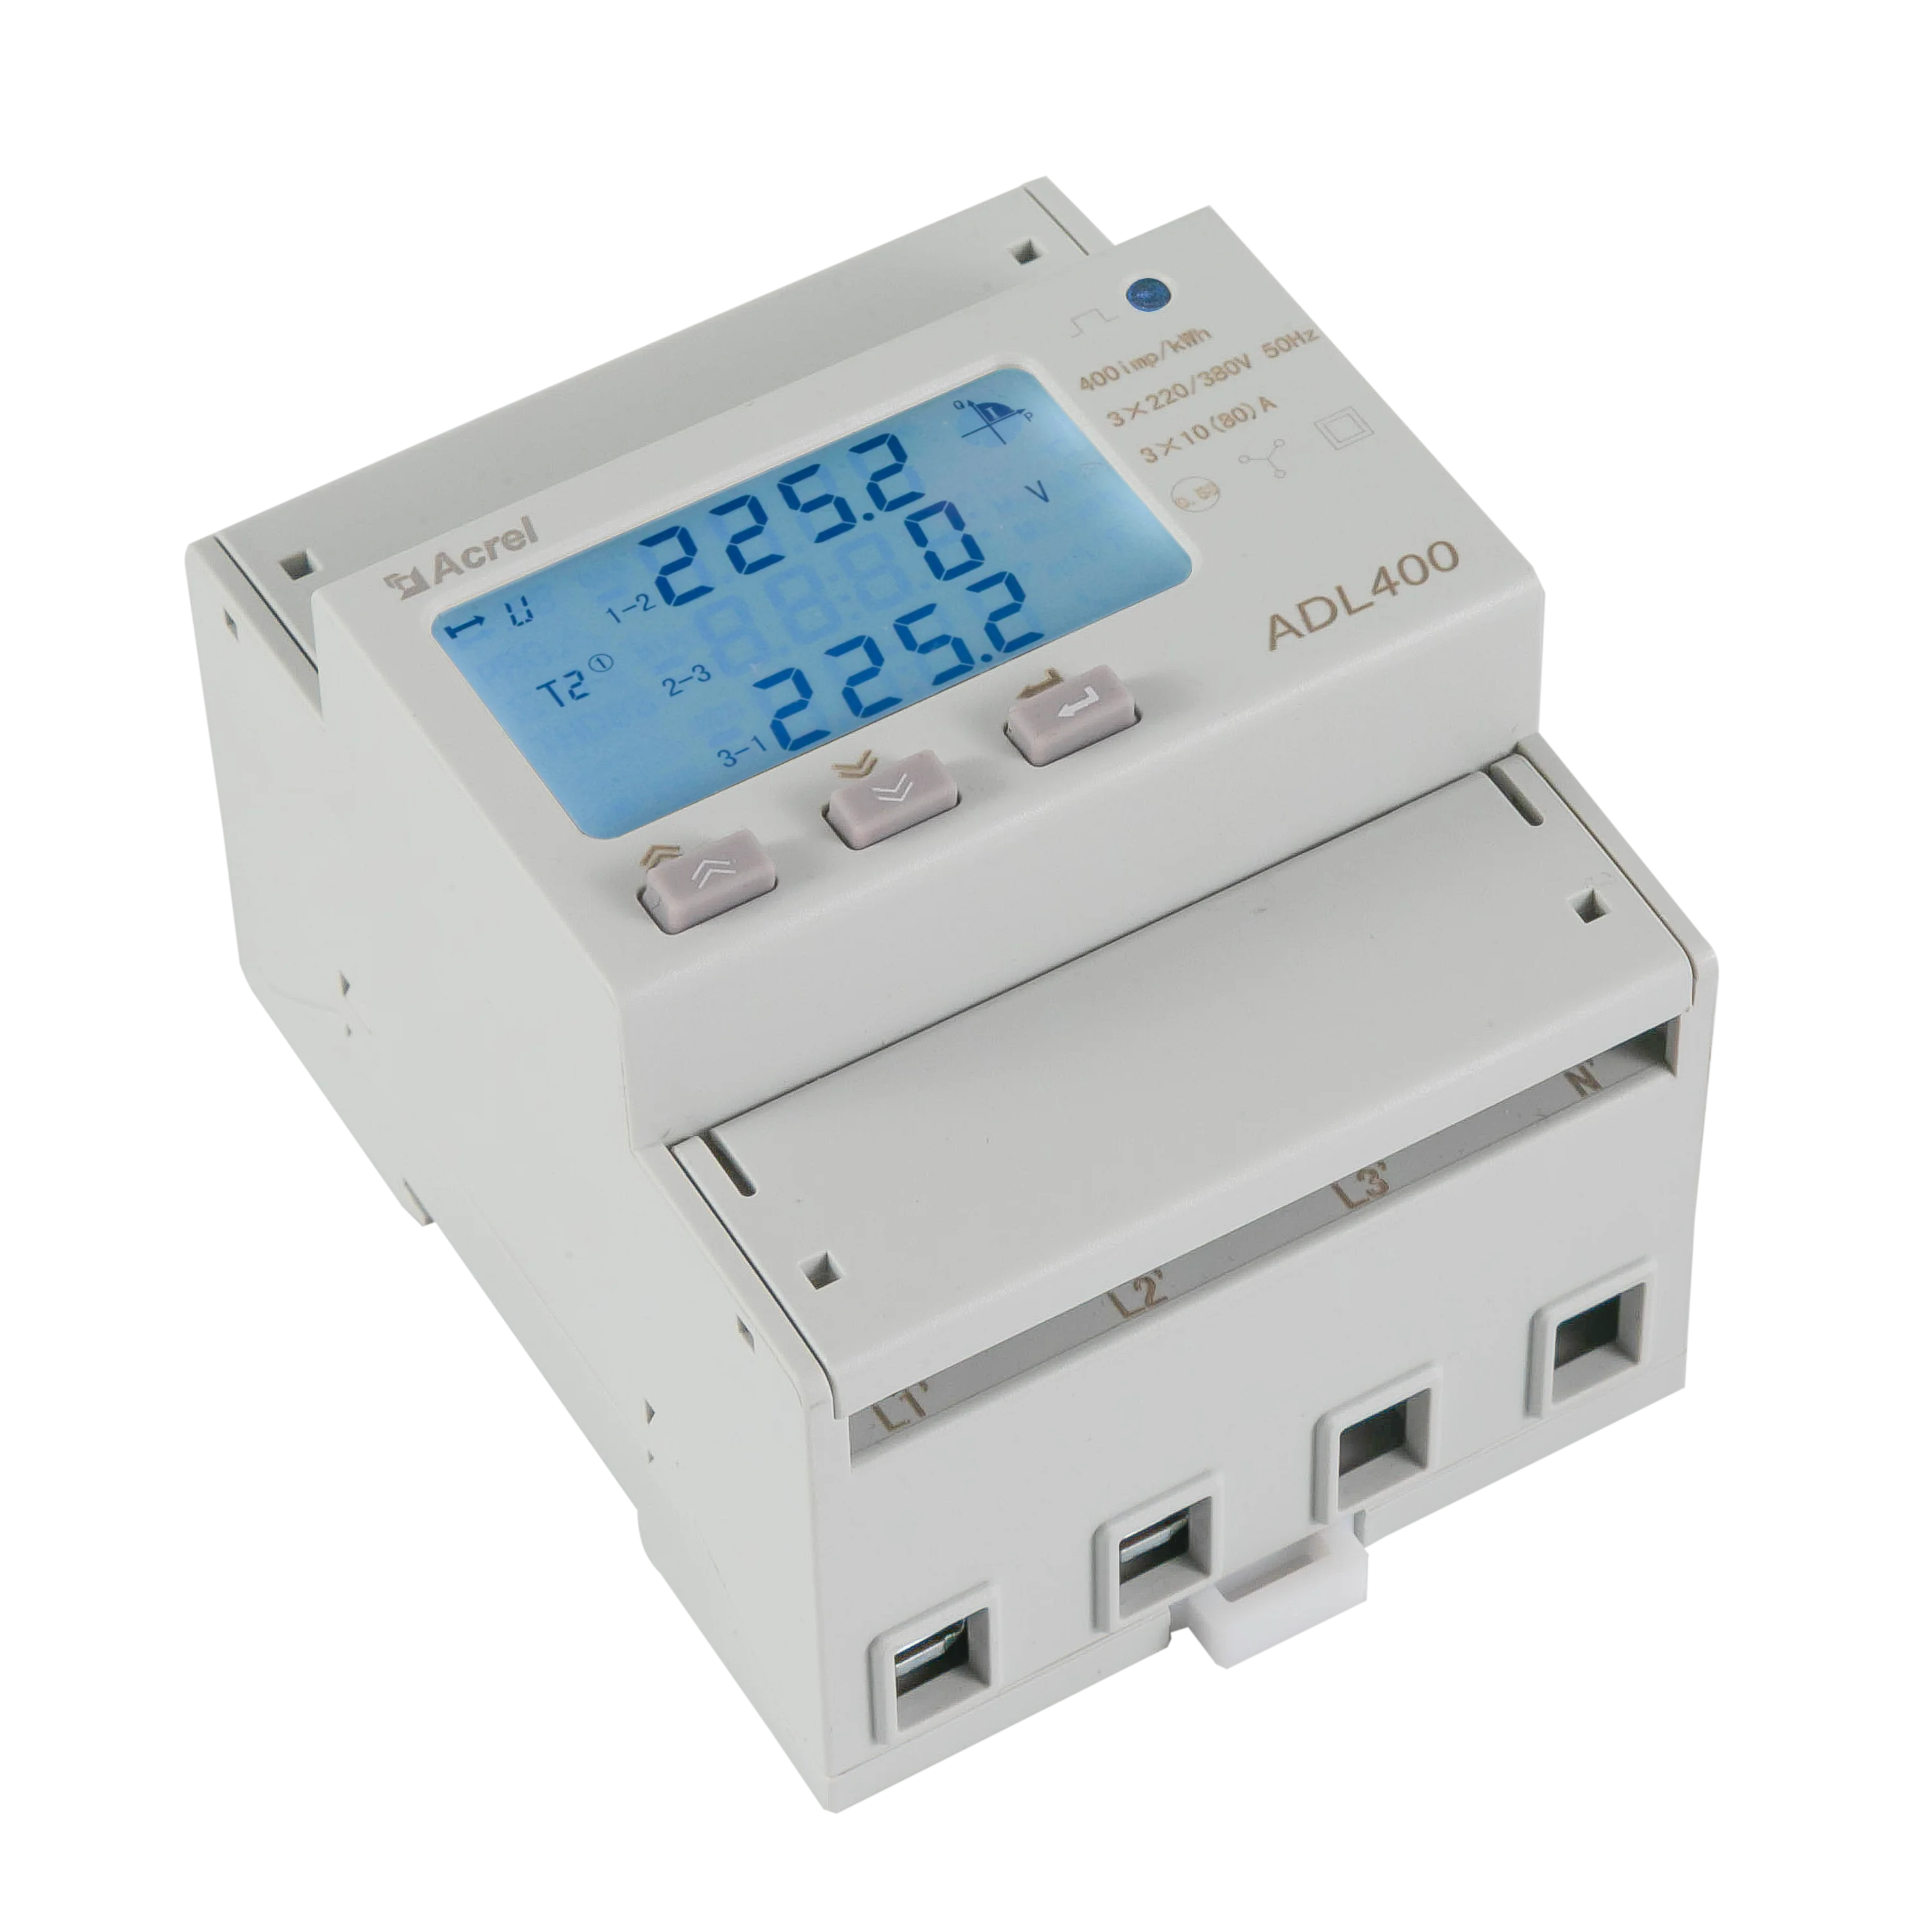 ADL400 Three Phase RS485 Modbus Meter Smart Mini Electrical Din Rail Multifunction Mbus Meter with Resettable Energy